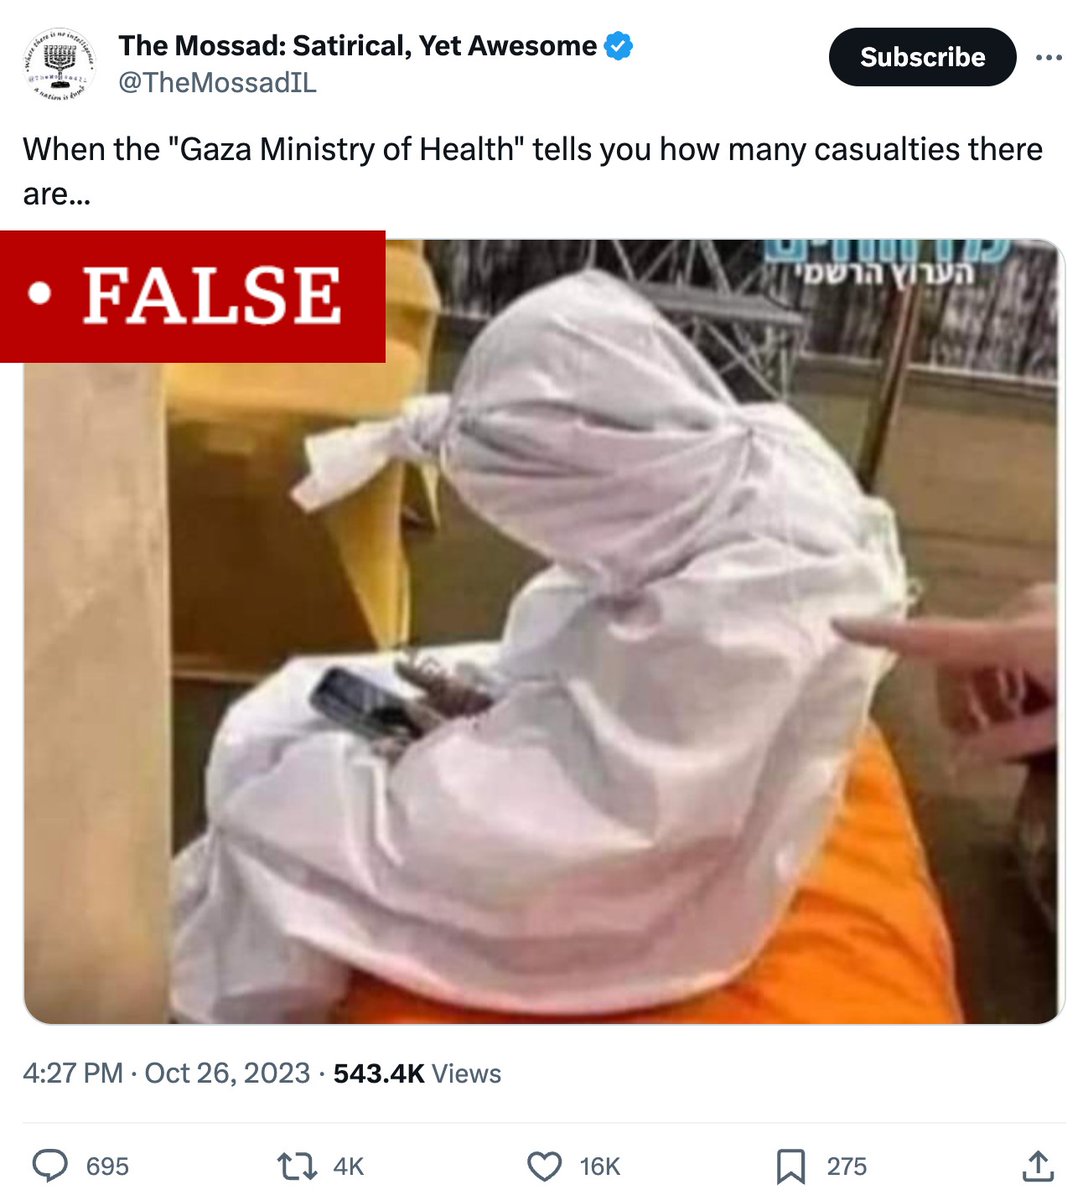 This image has gone viral in pro-Isreal circles, claiming to show a fake Palestinian corpse caught texting on his phone. Let's go through the image verification process step-by-step, using Google's reverse image search. Where does the photo come from and what's the context?